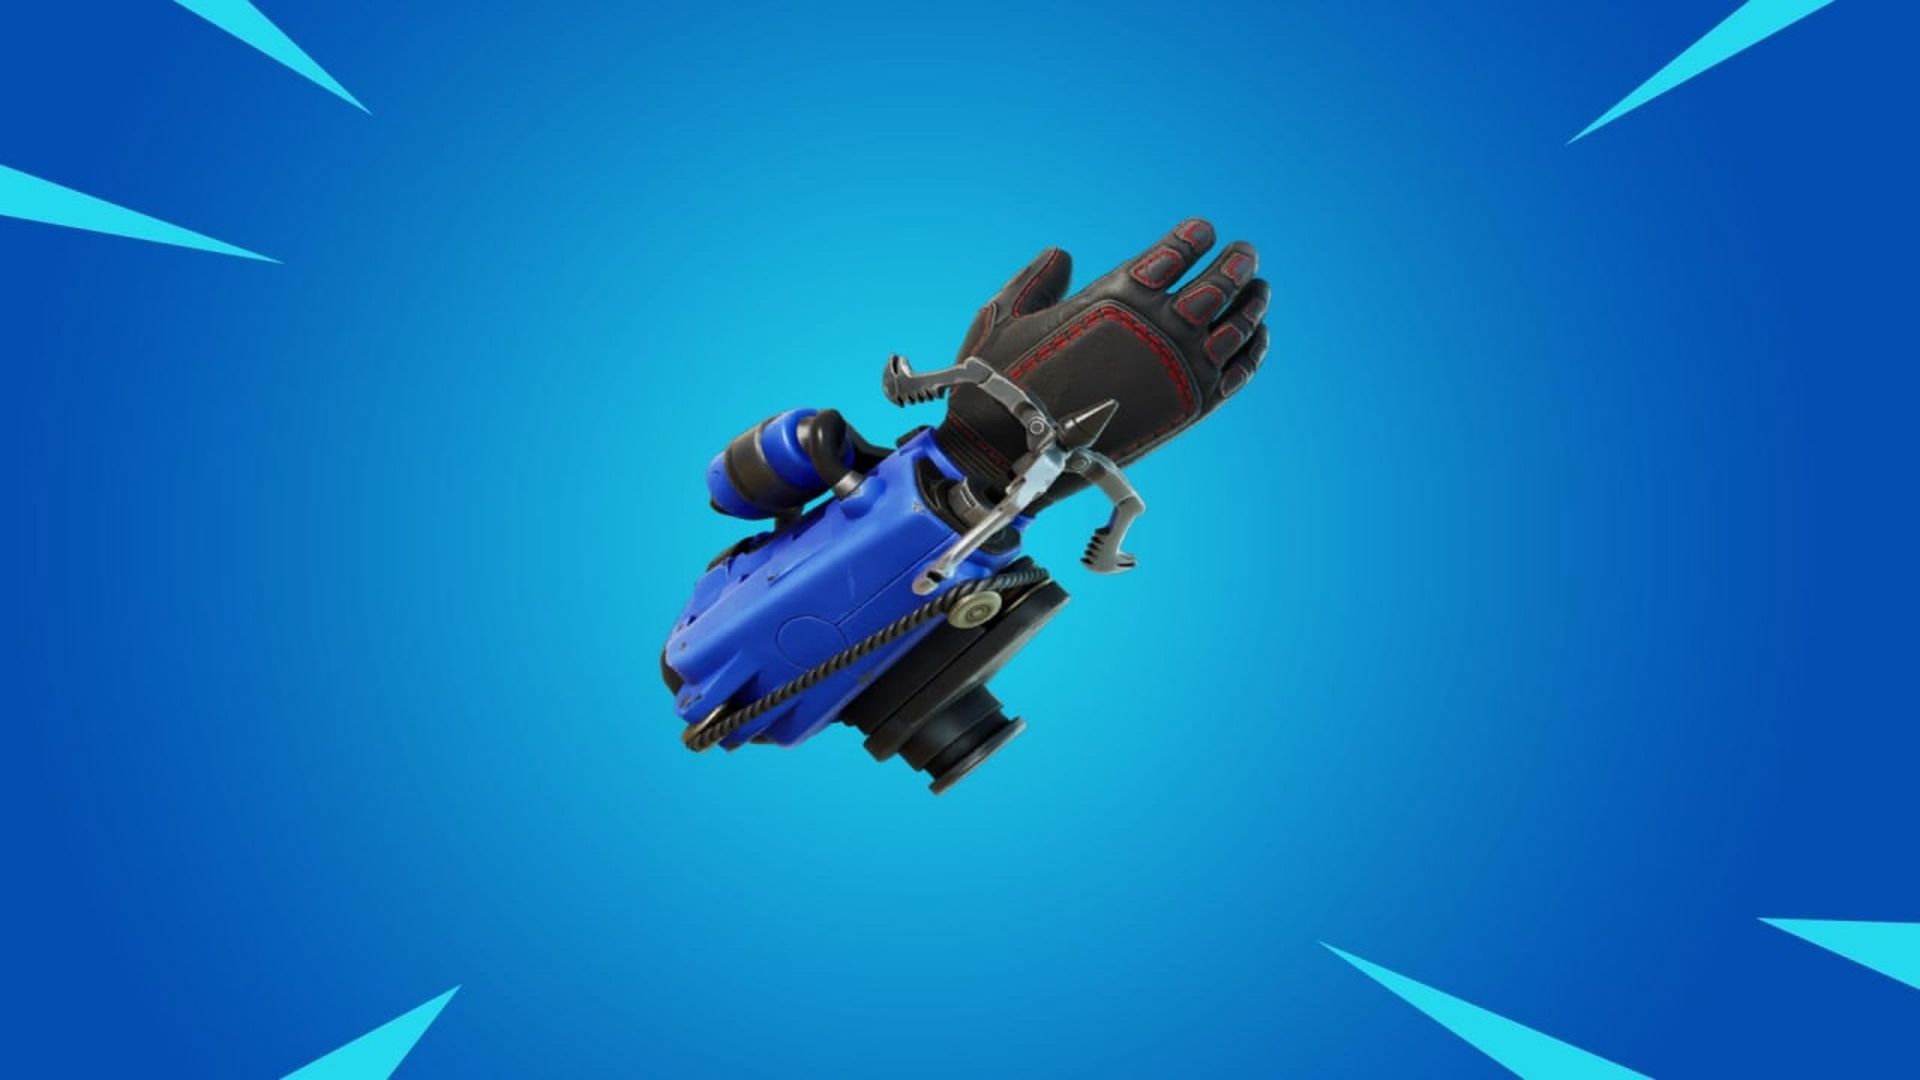 Below we are going to show you all Fortnite Grapple Glove locations and how to use them in the game.